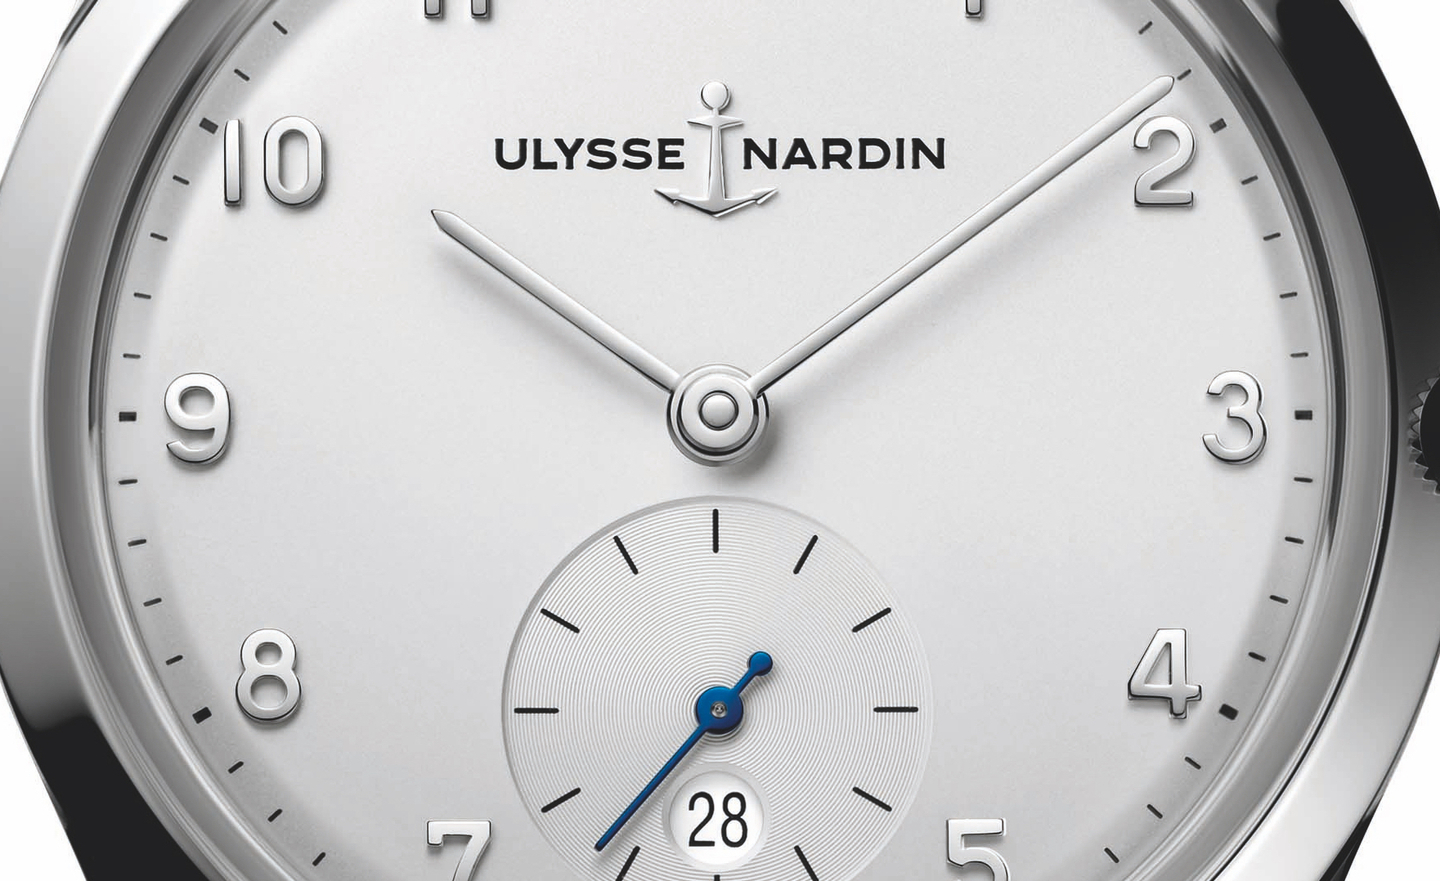 Another Ulysse Nardin that does not resemble the Nebuchadnezzar